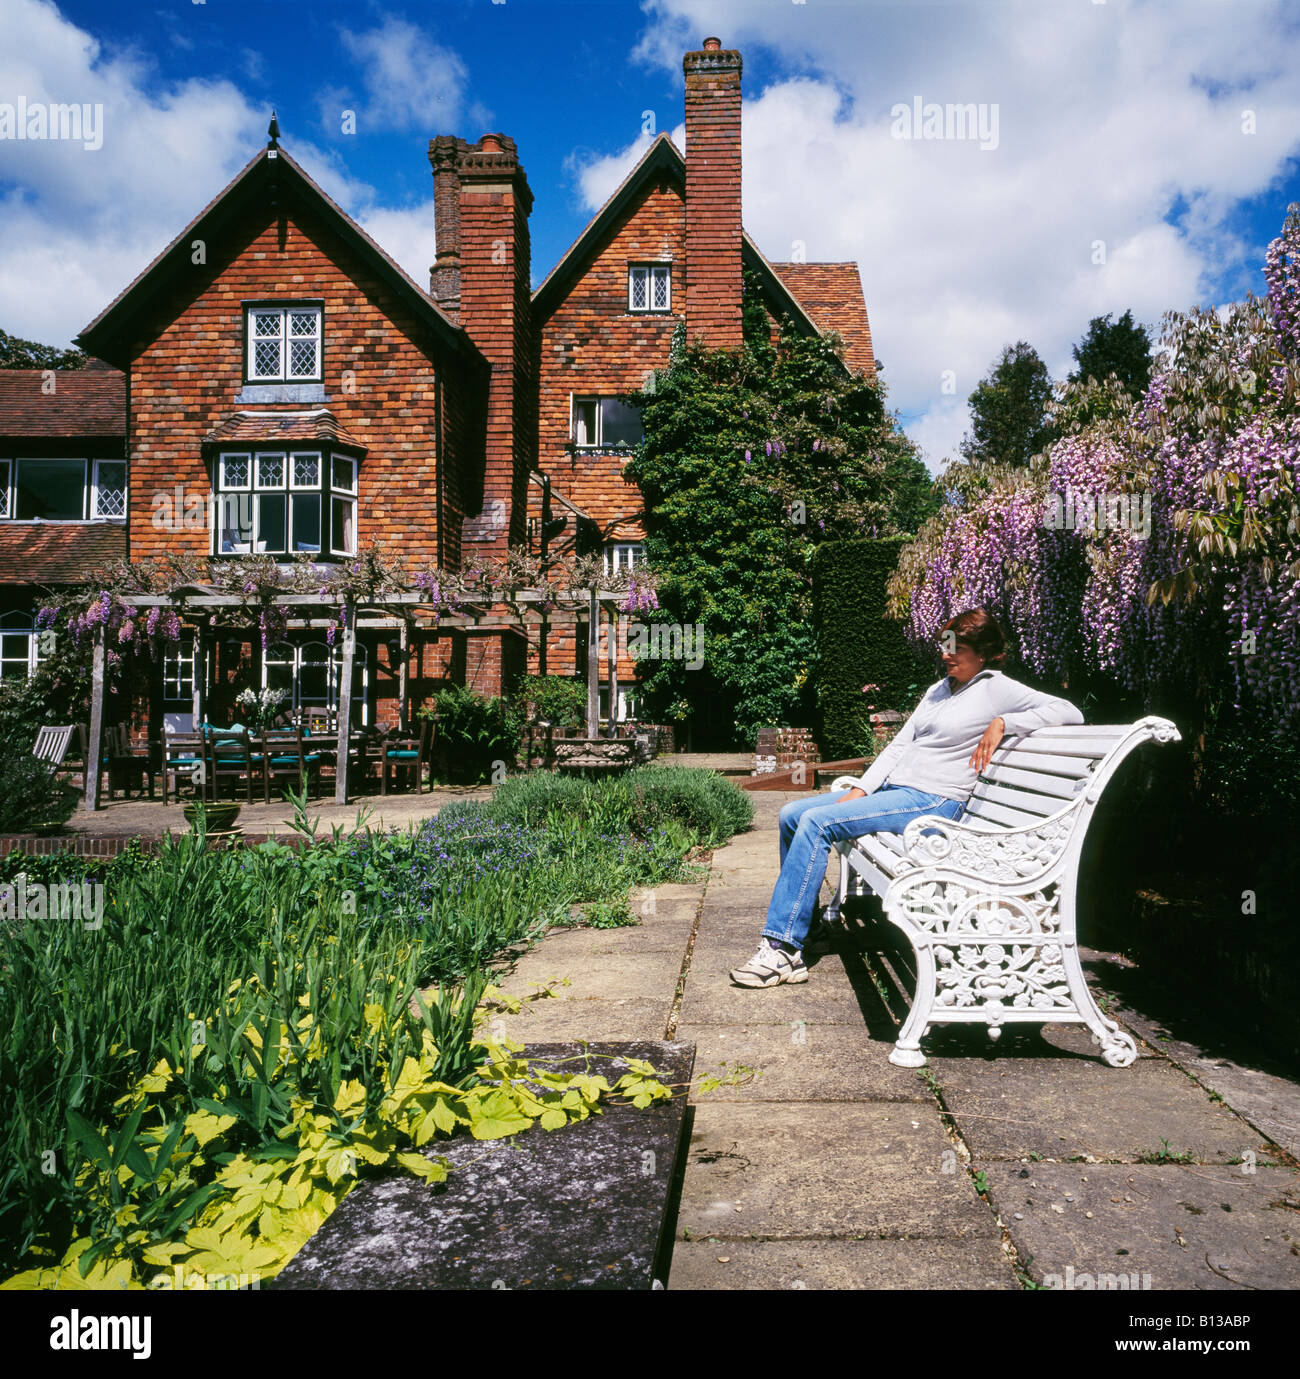 Woman relaxing in a garden Marle Place Brenchley Nr Tonbridge Kent England UK. Banque D'Images